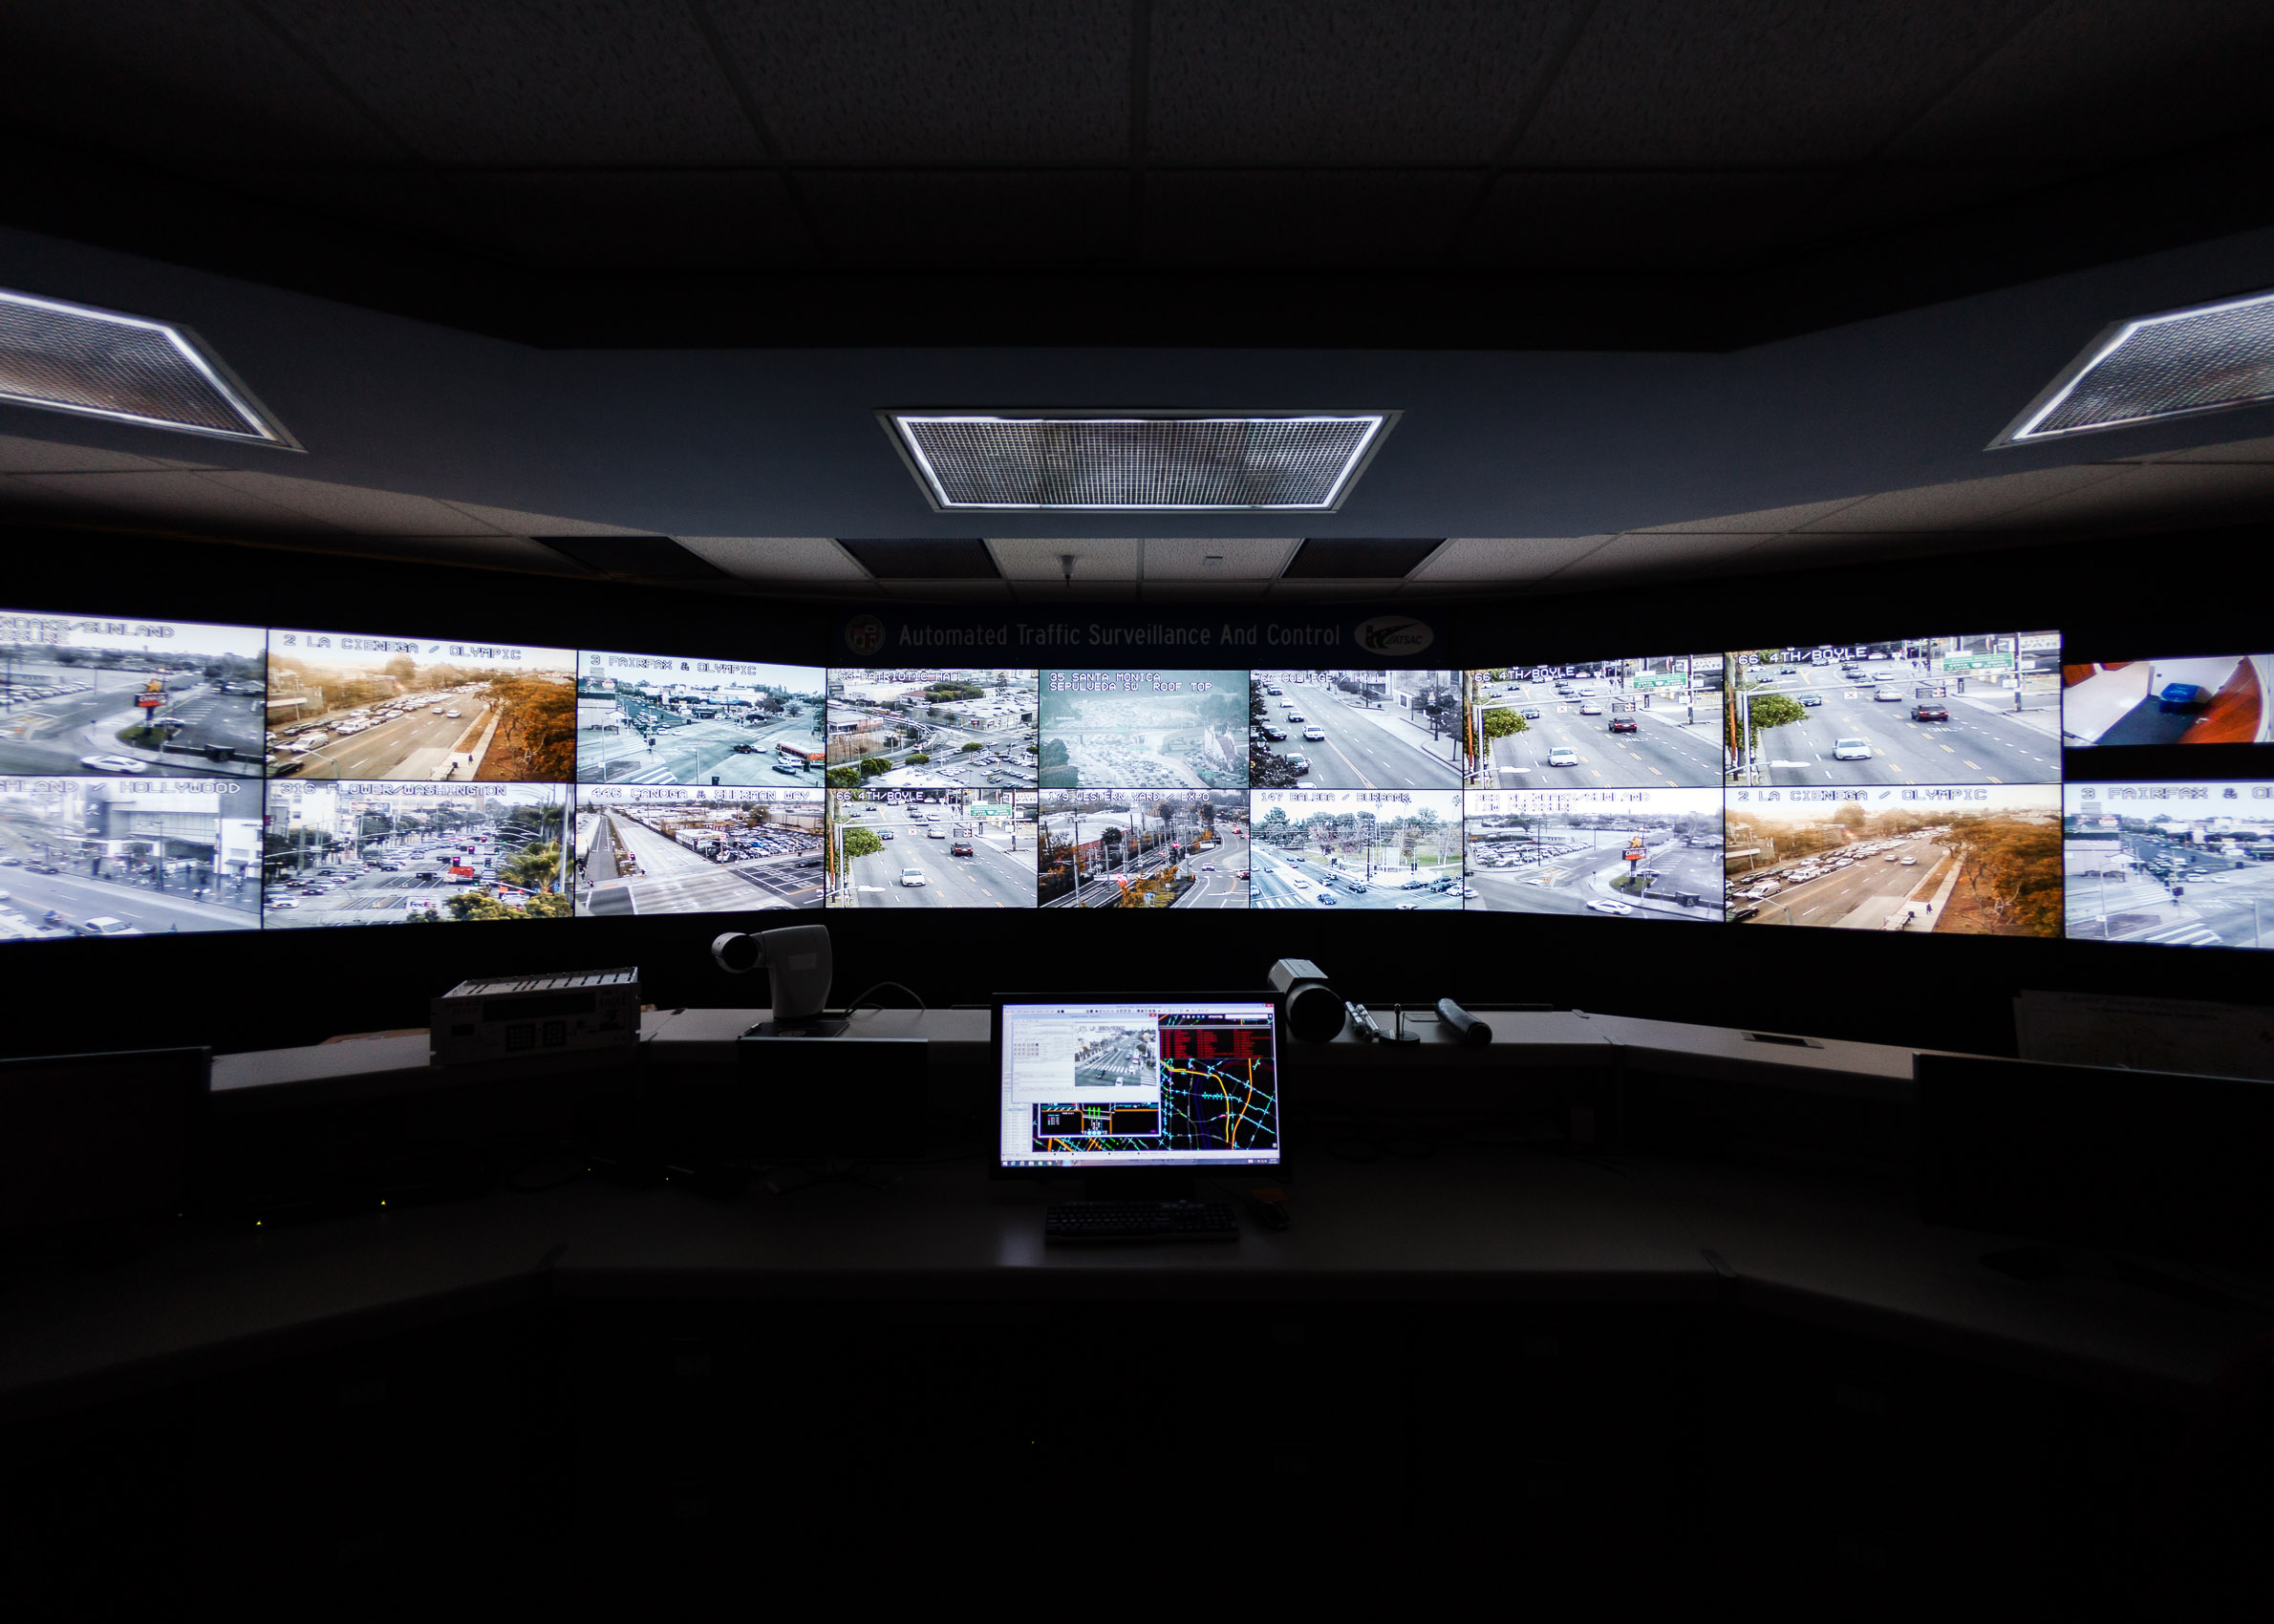 The Automated Traffic Surveillance and Control (ATSAC) System | Los Angeles | Editorial and Commercial Photographer Patrick Strattner